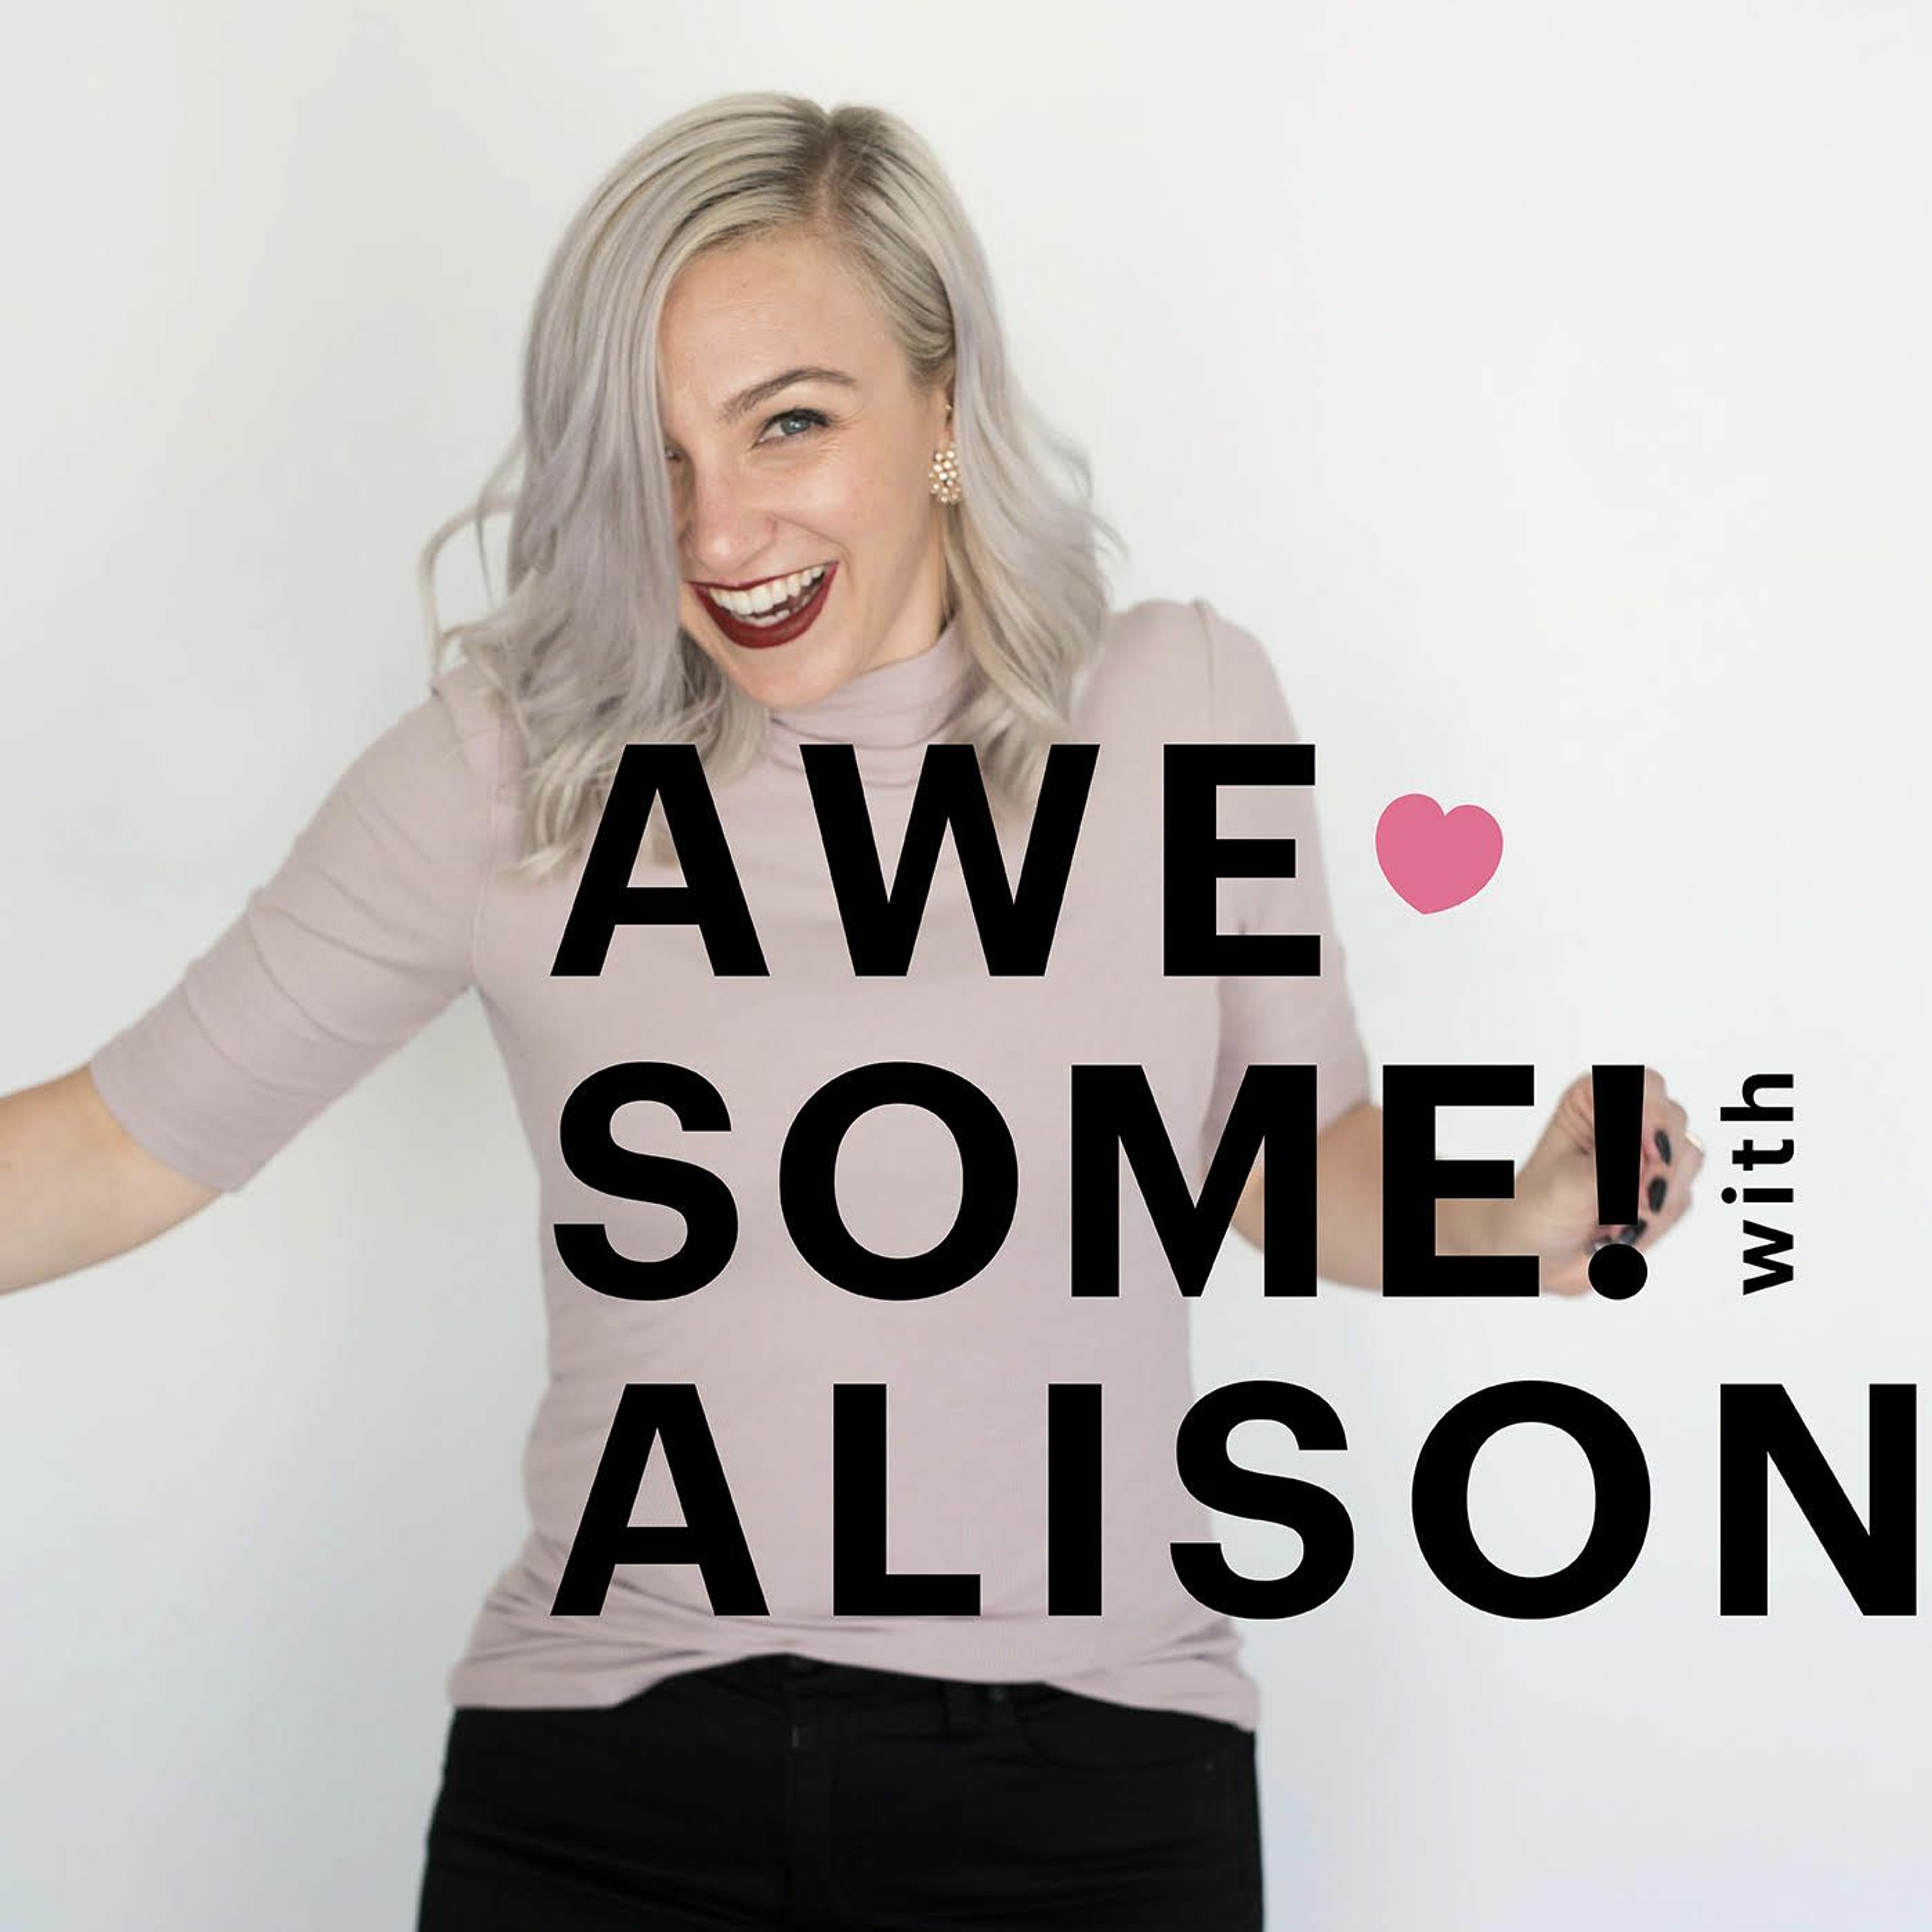 Ep. 5: Alison’s Top 5 Lessons Learned in 2016